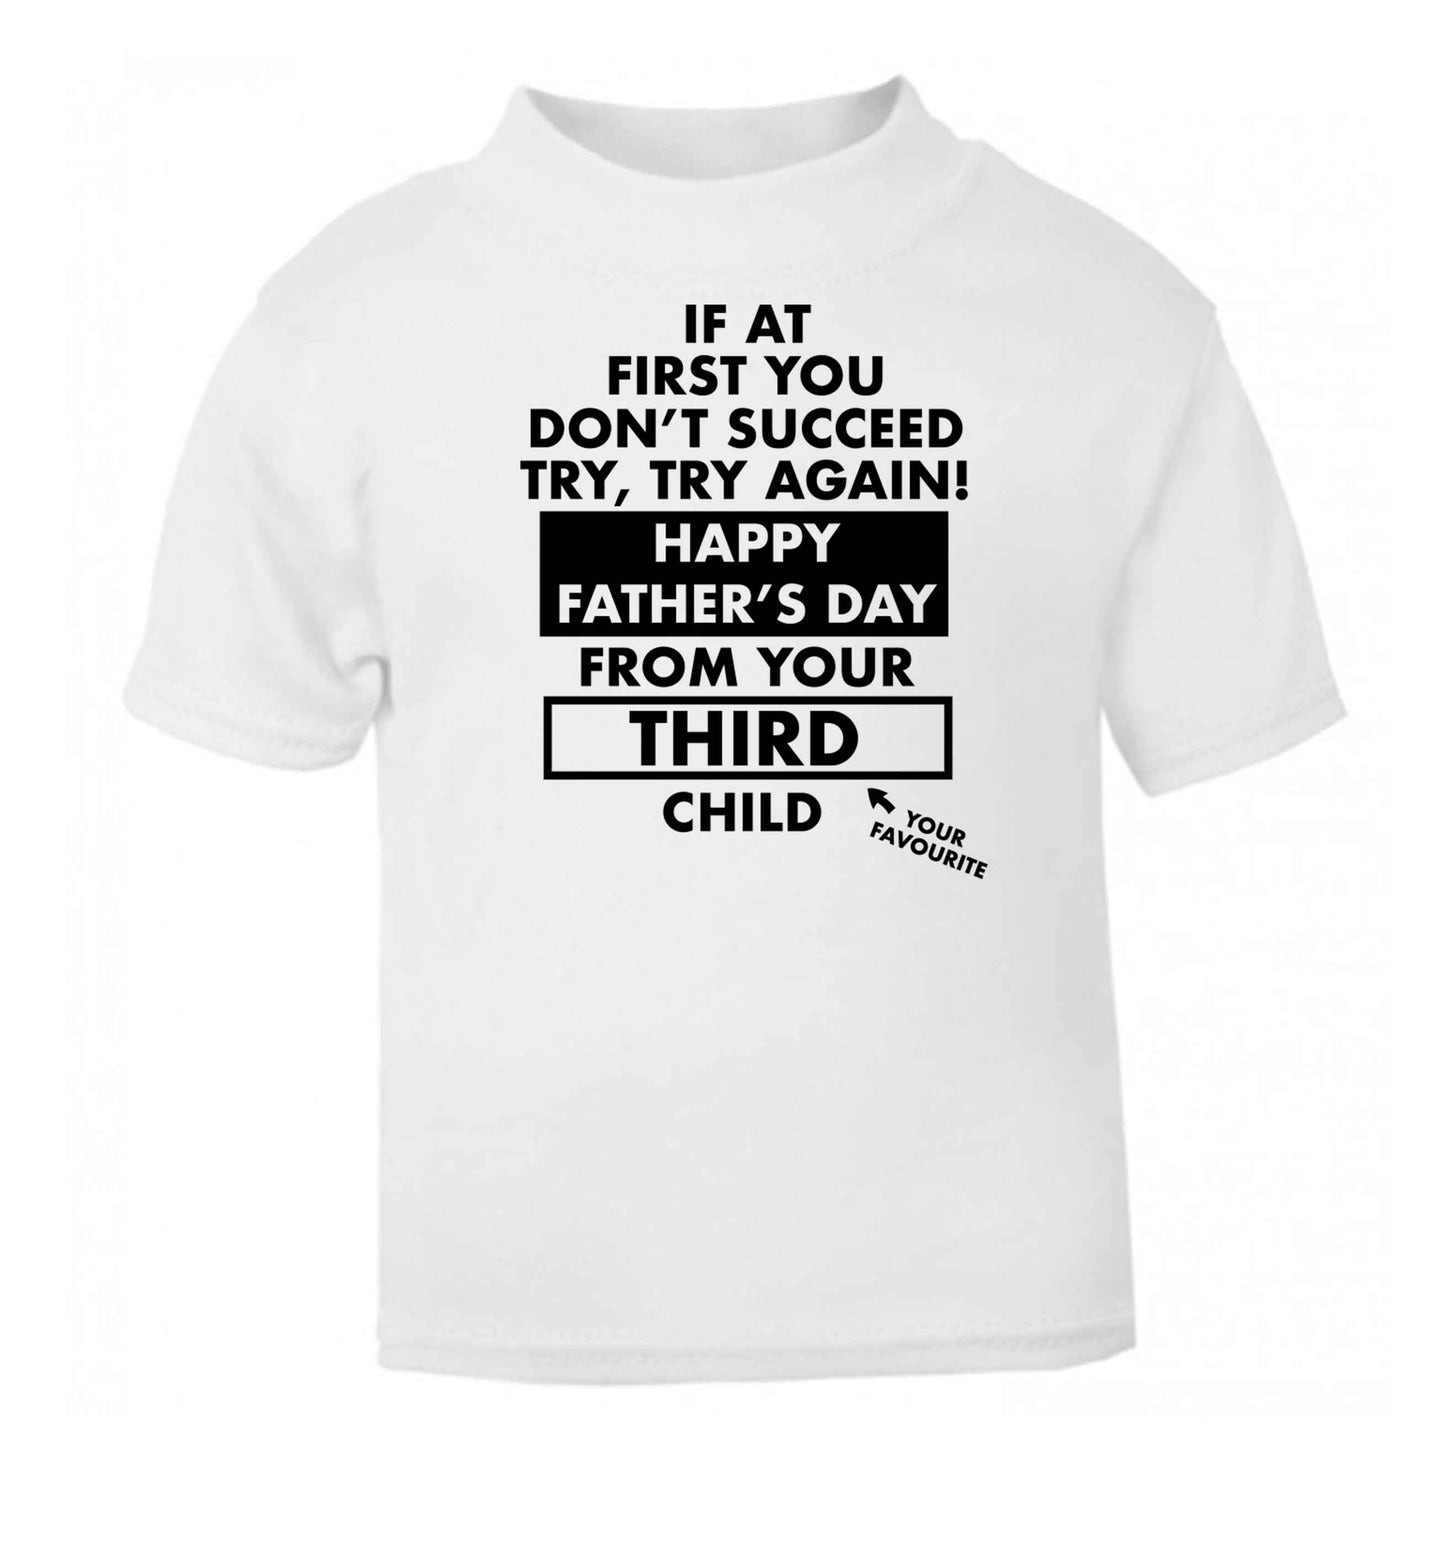 If at first you don't succeed try, try again Happy Father's day from your third child! white baby toddler Tshirt 2 Years